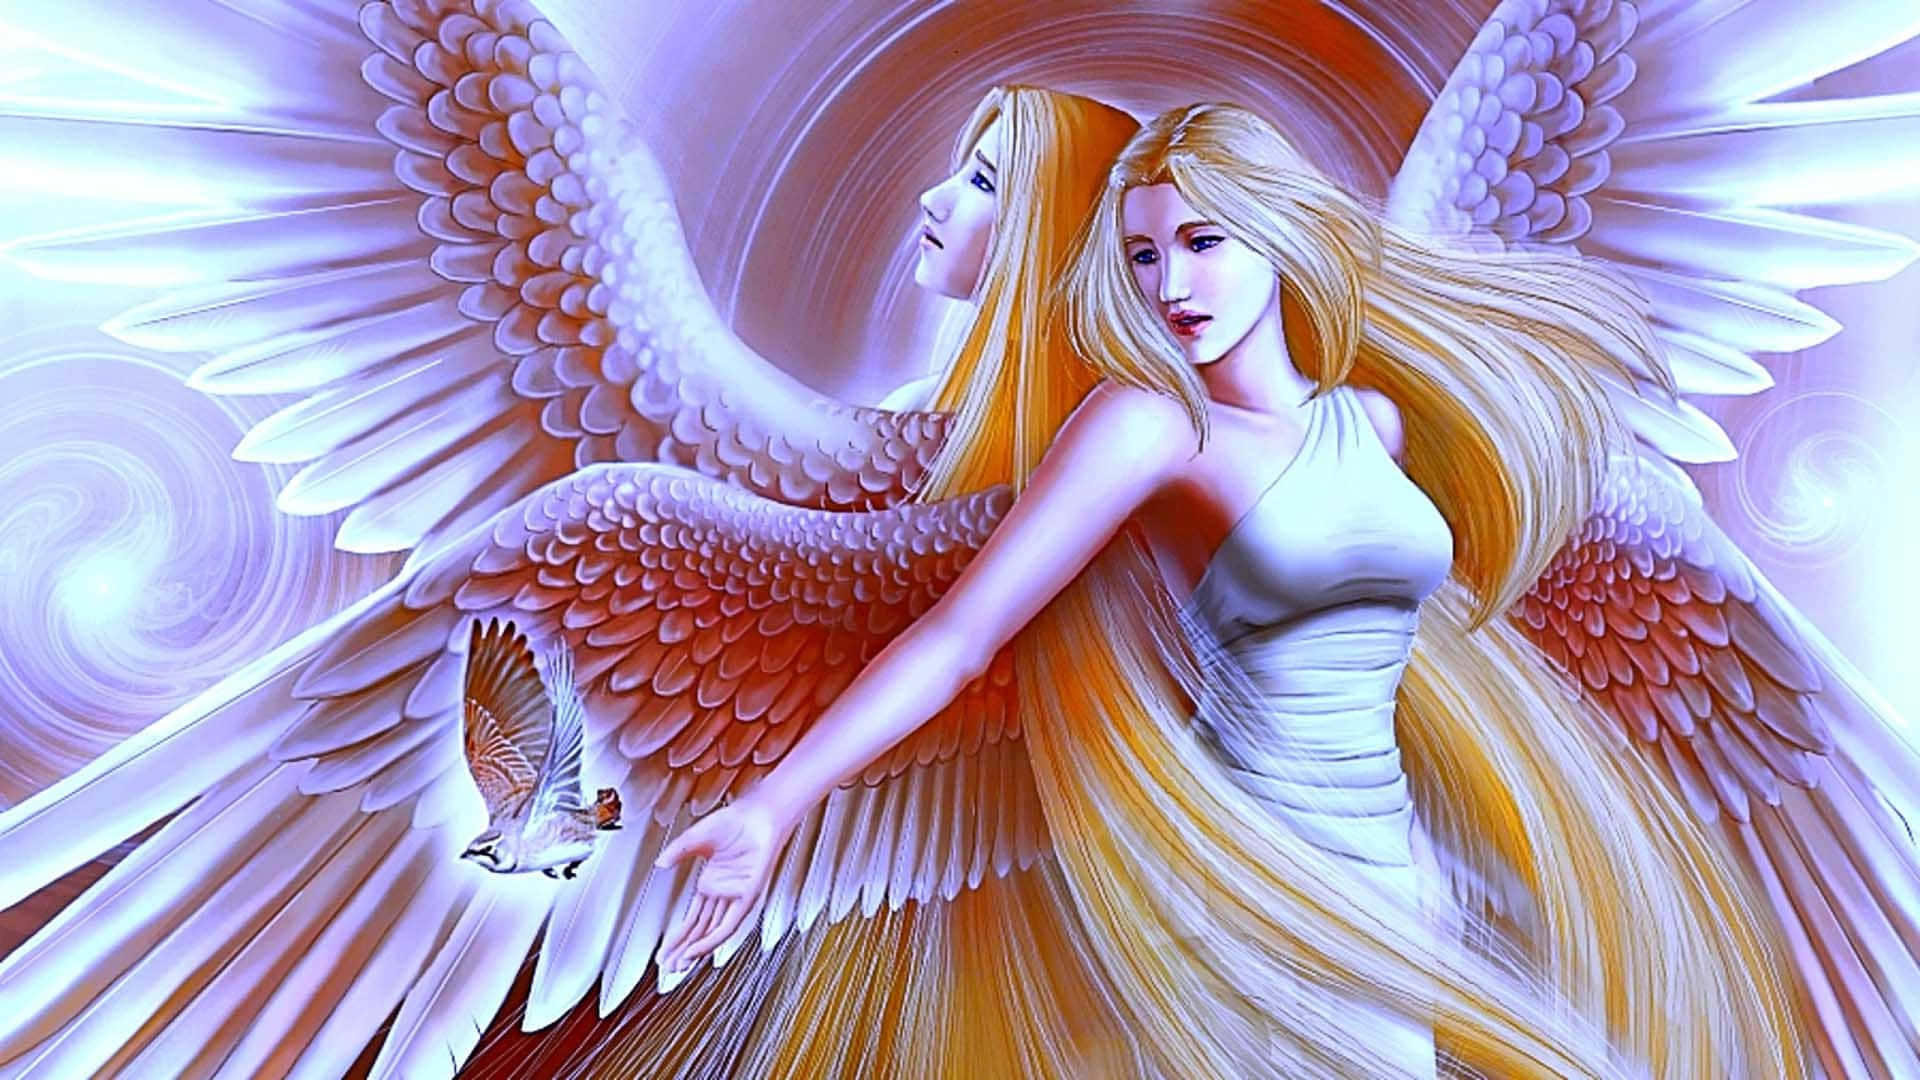 In heavenly spirit, angelic beings inspired by faith and divine intuition